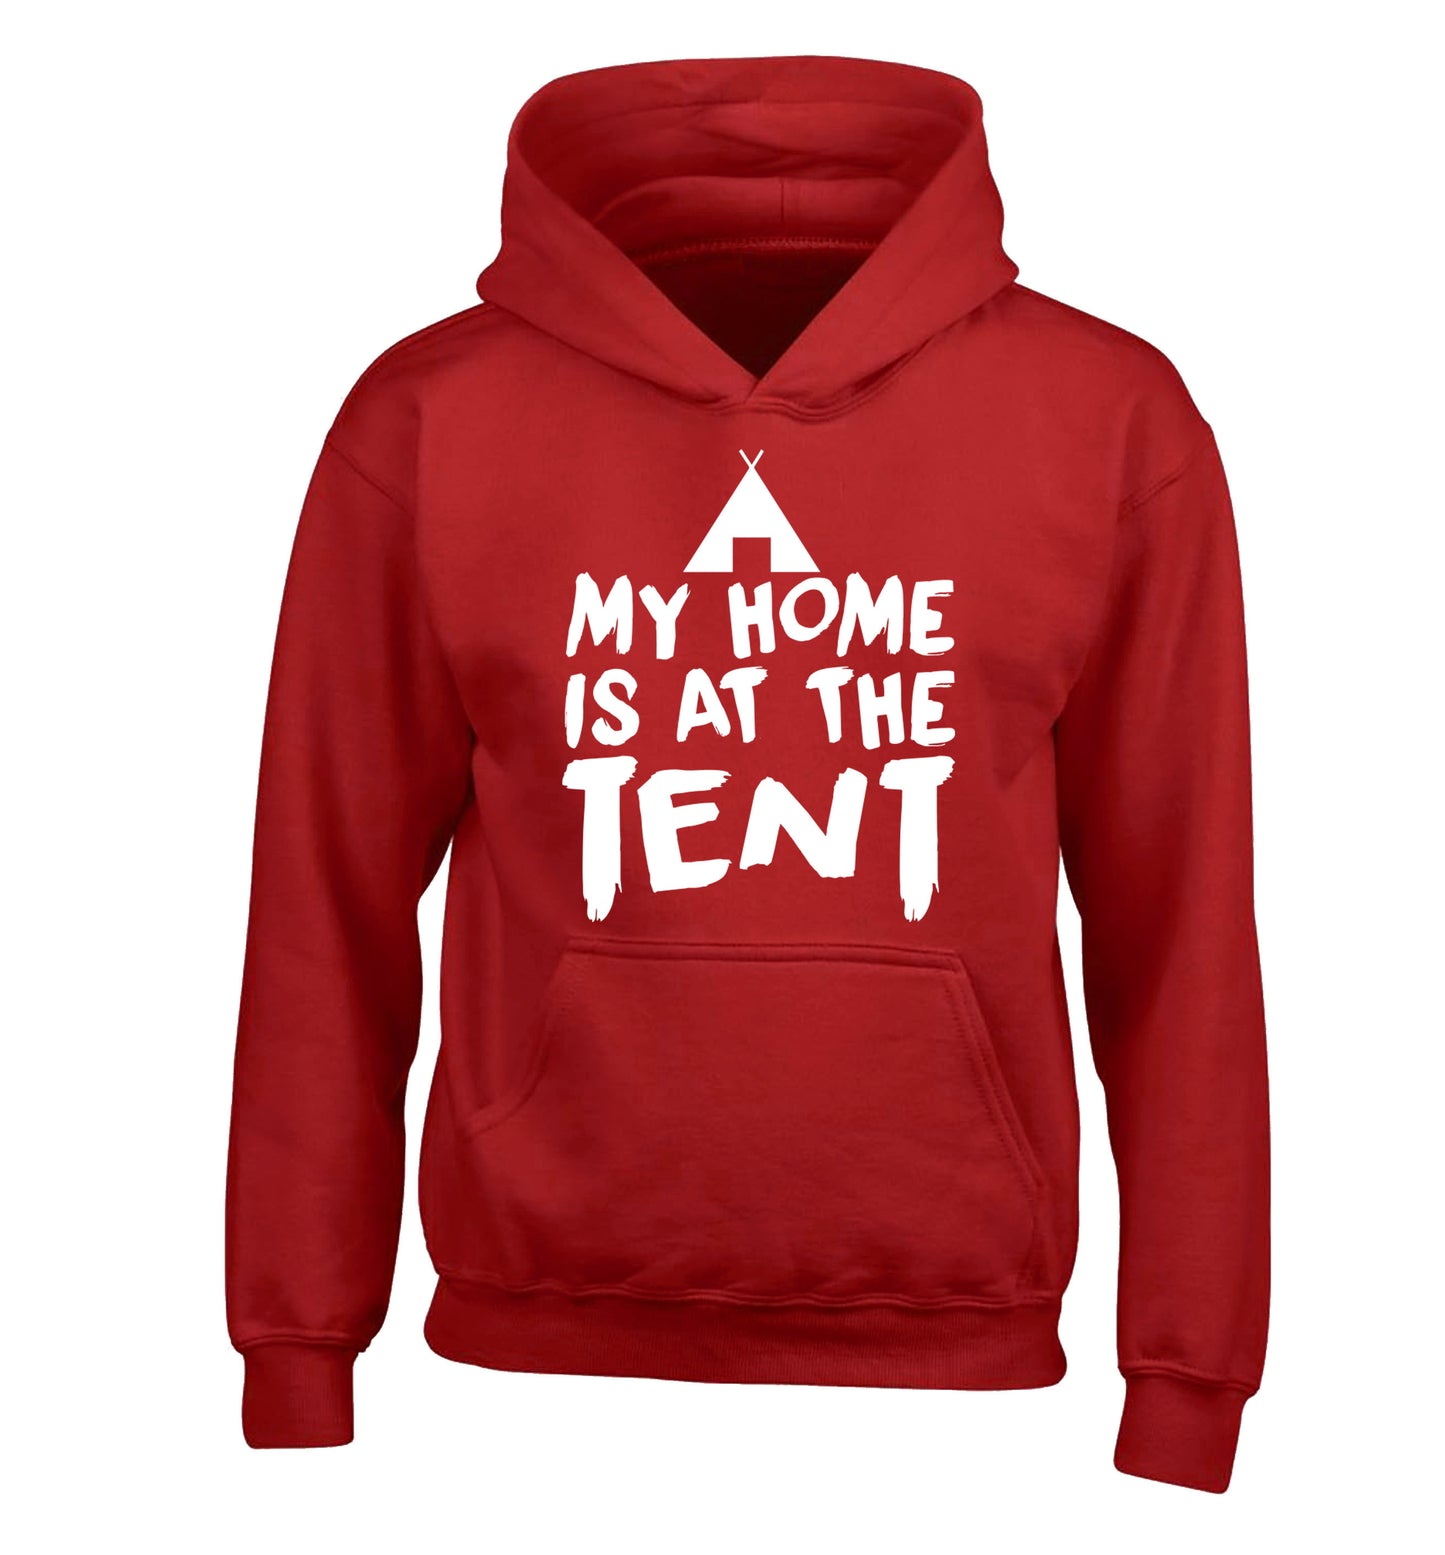 My home is at the tent children's red hoodie 12-14 Years